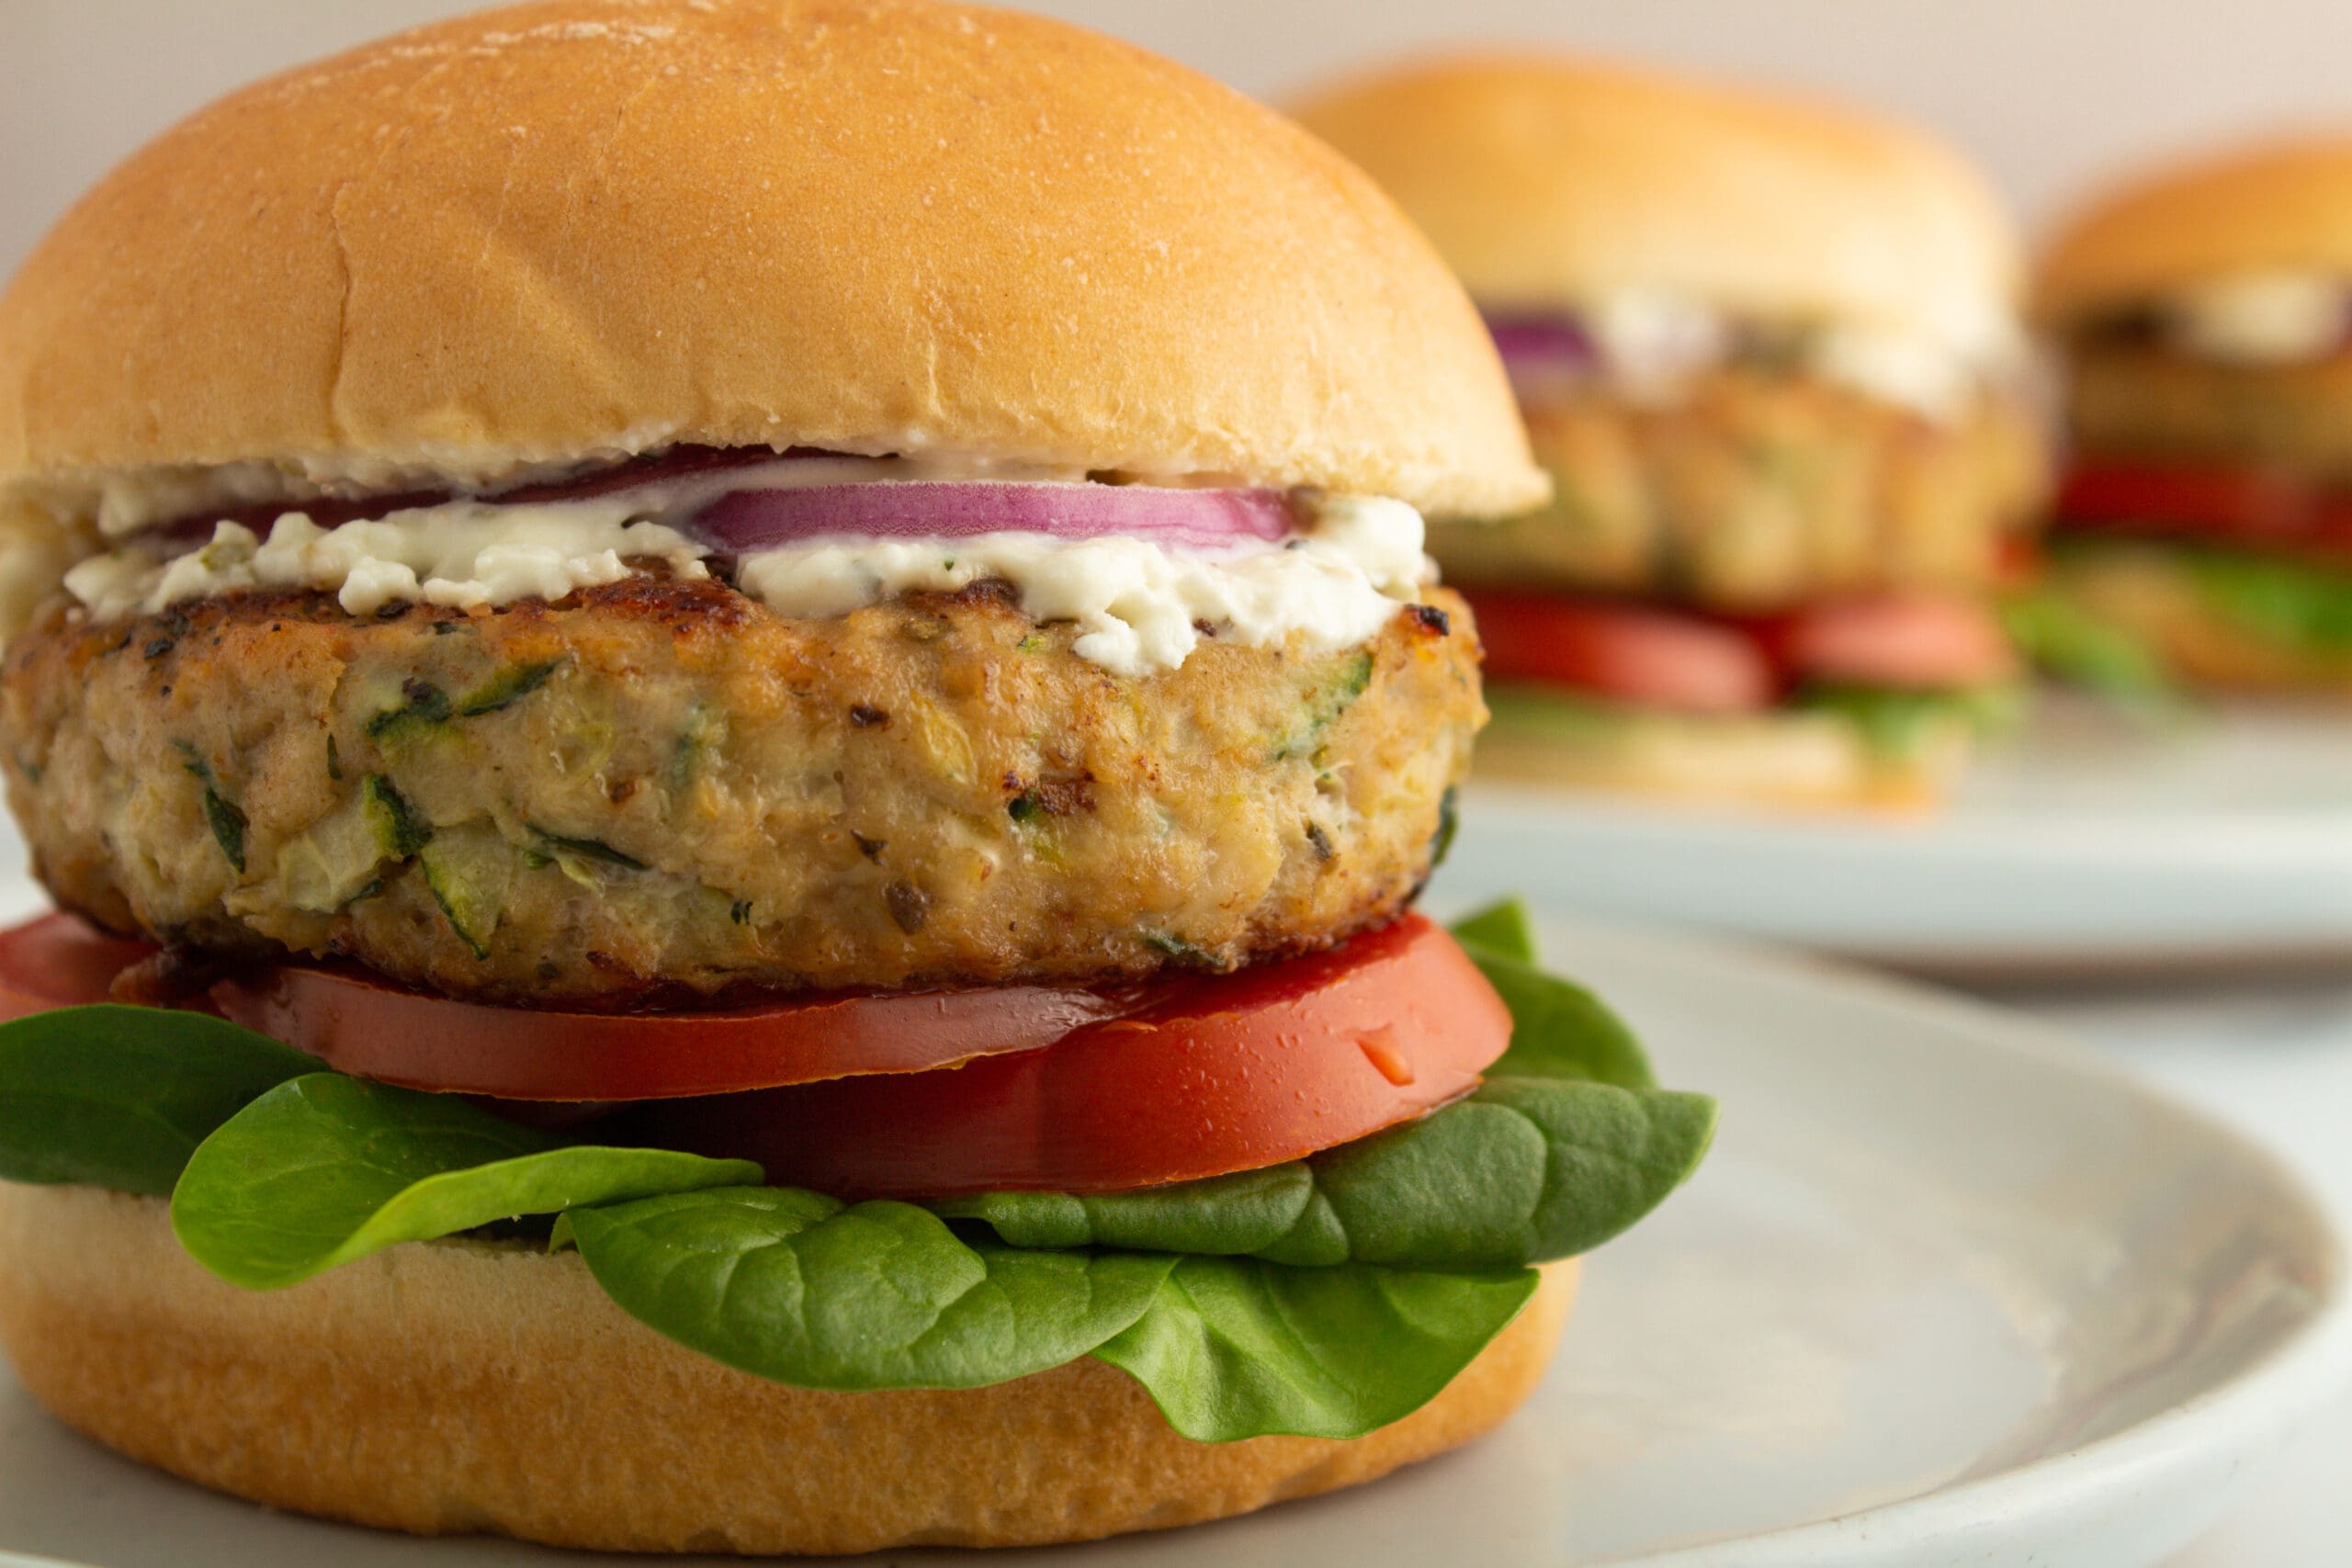 Farmer Focus Organic Ground Chicken Burger with tomato and spinach.